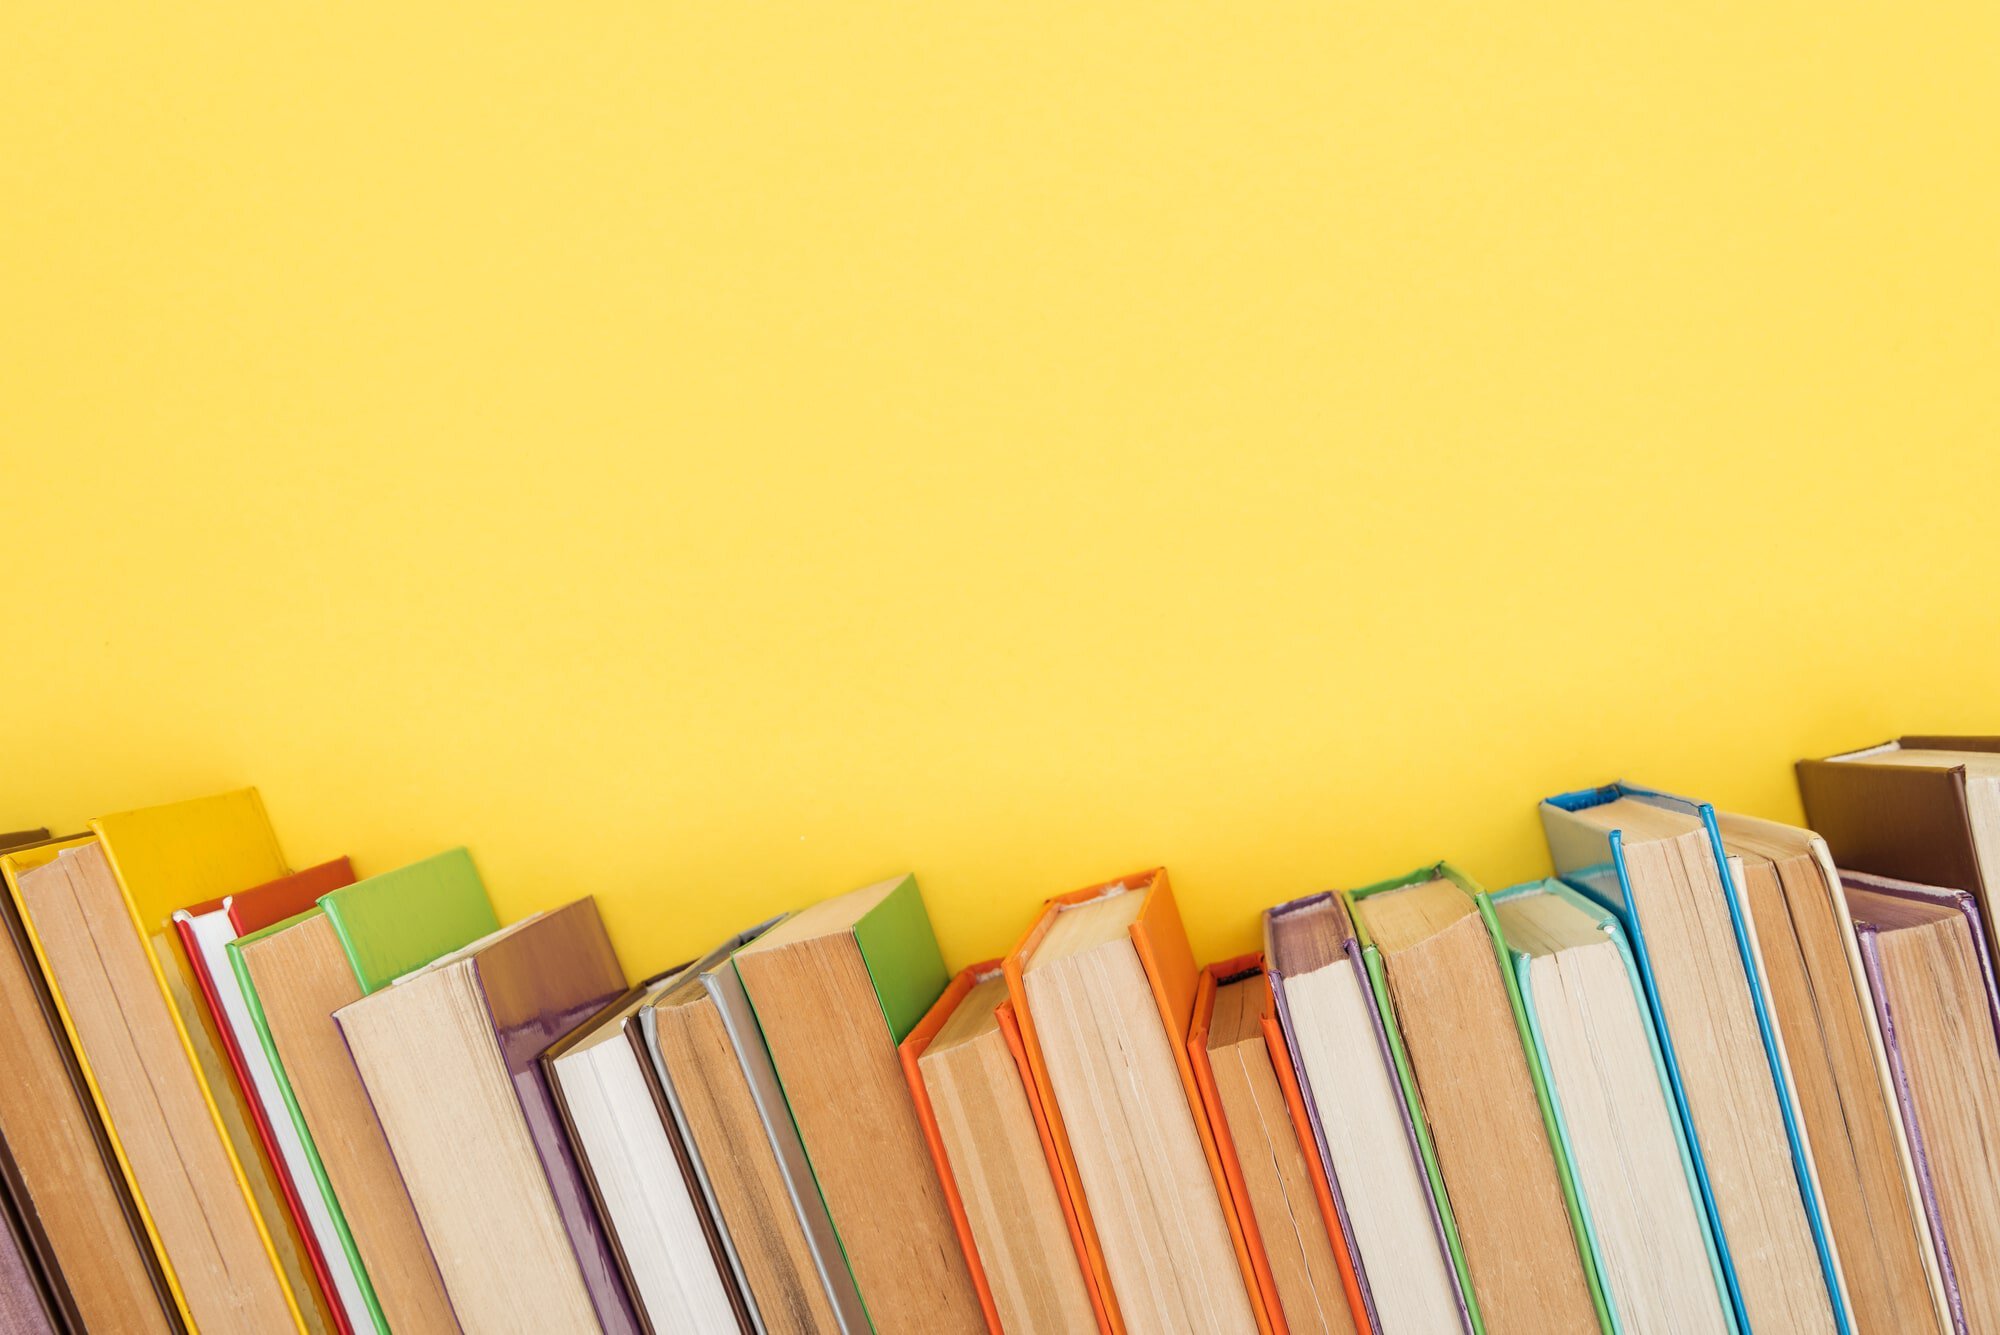 books on yellow background - How To Get Paid To Read Books